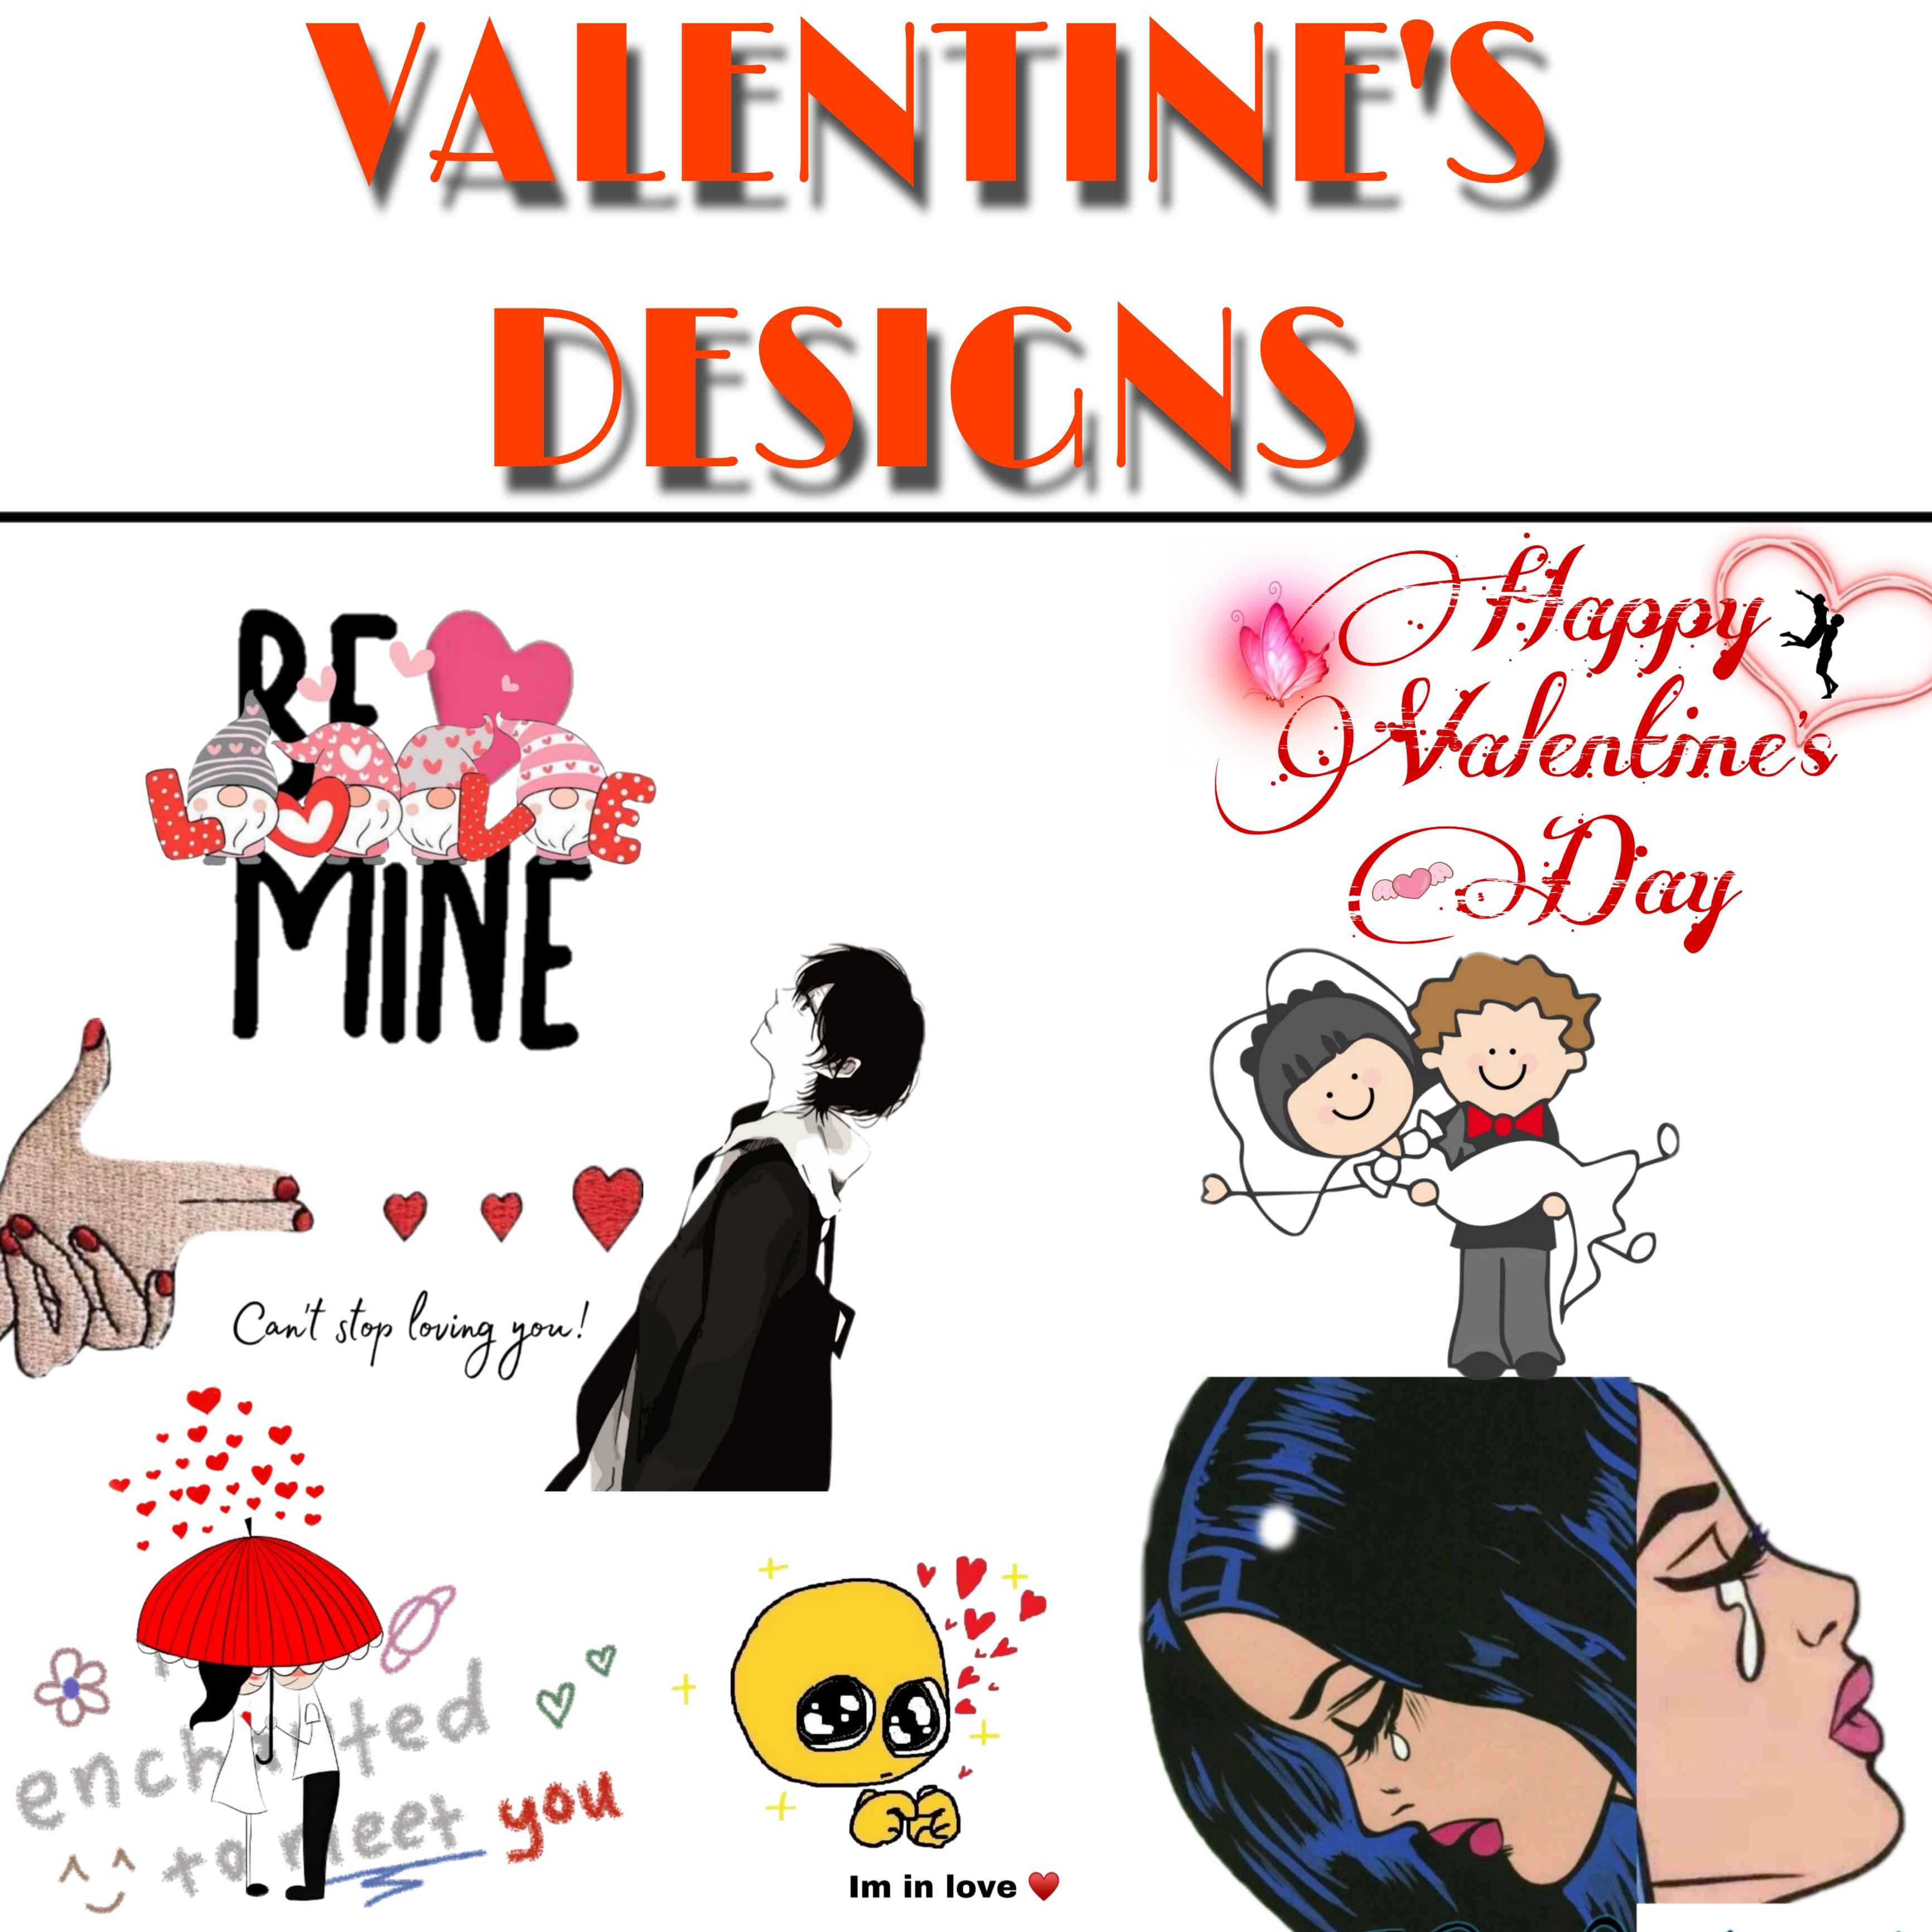 Valentine day special designs cover image.